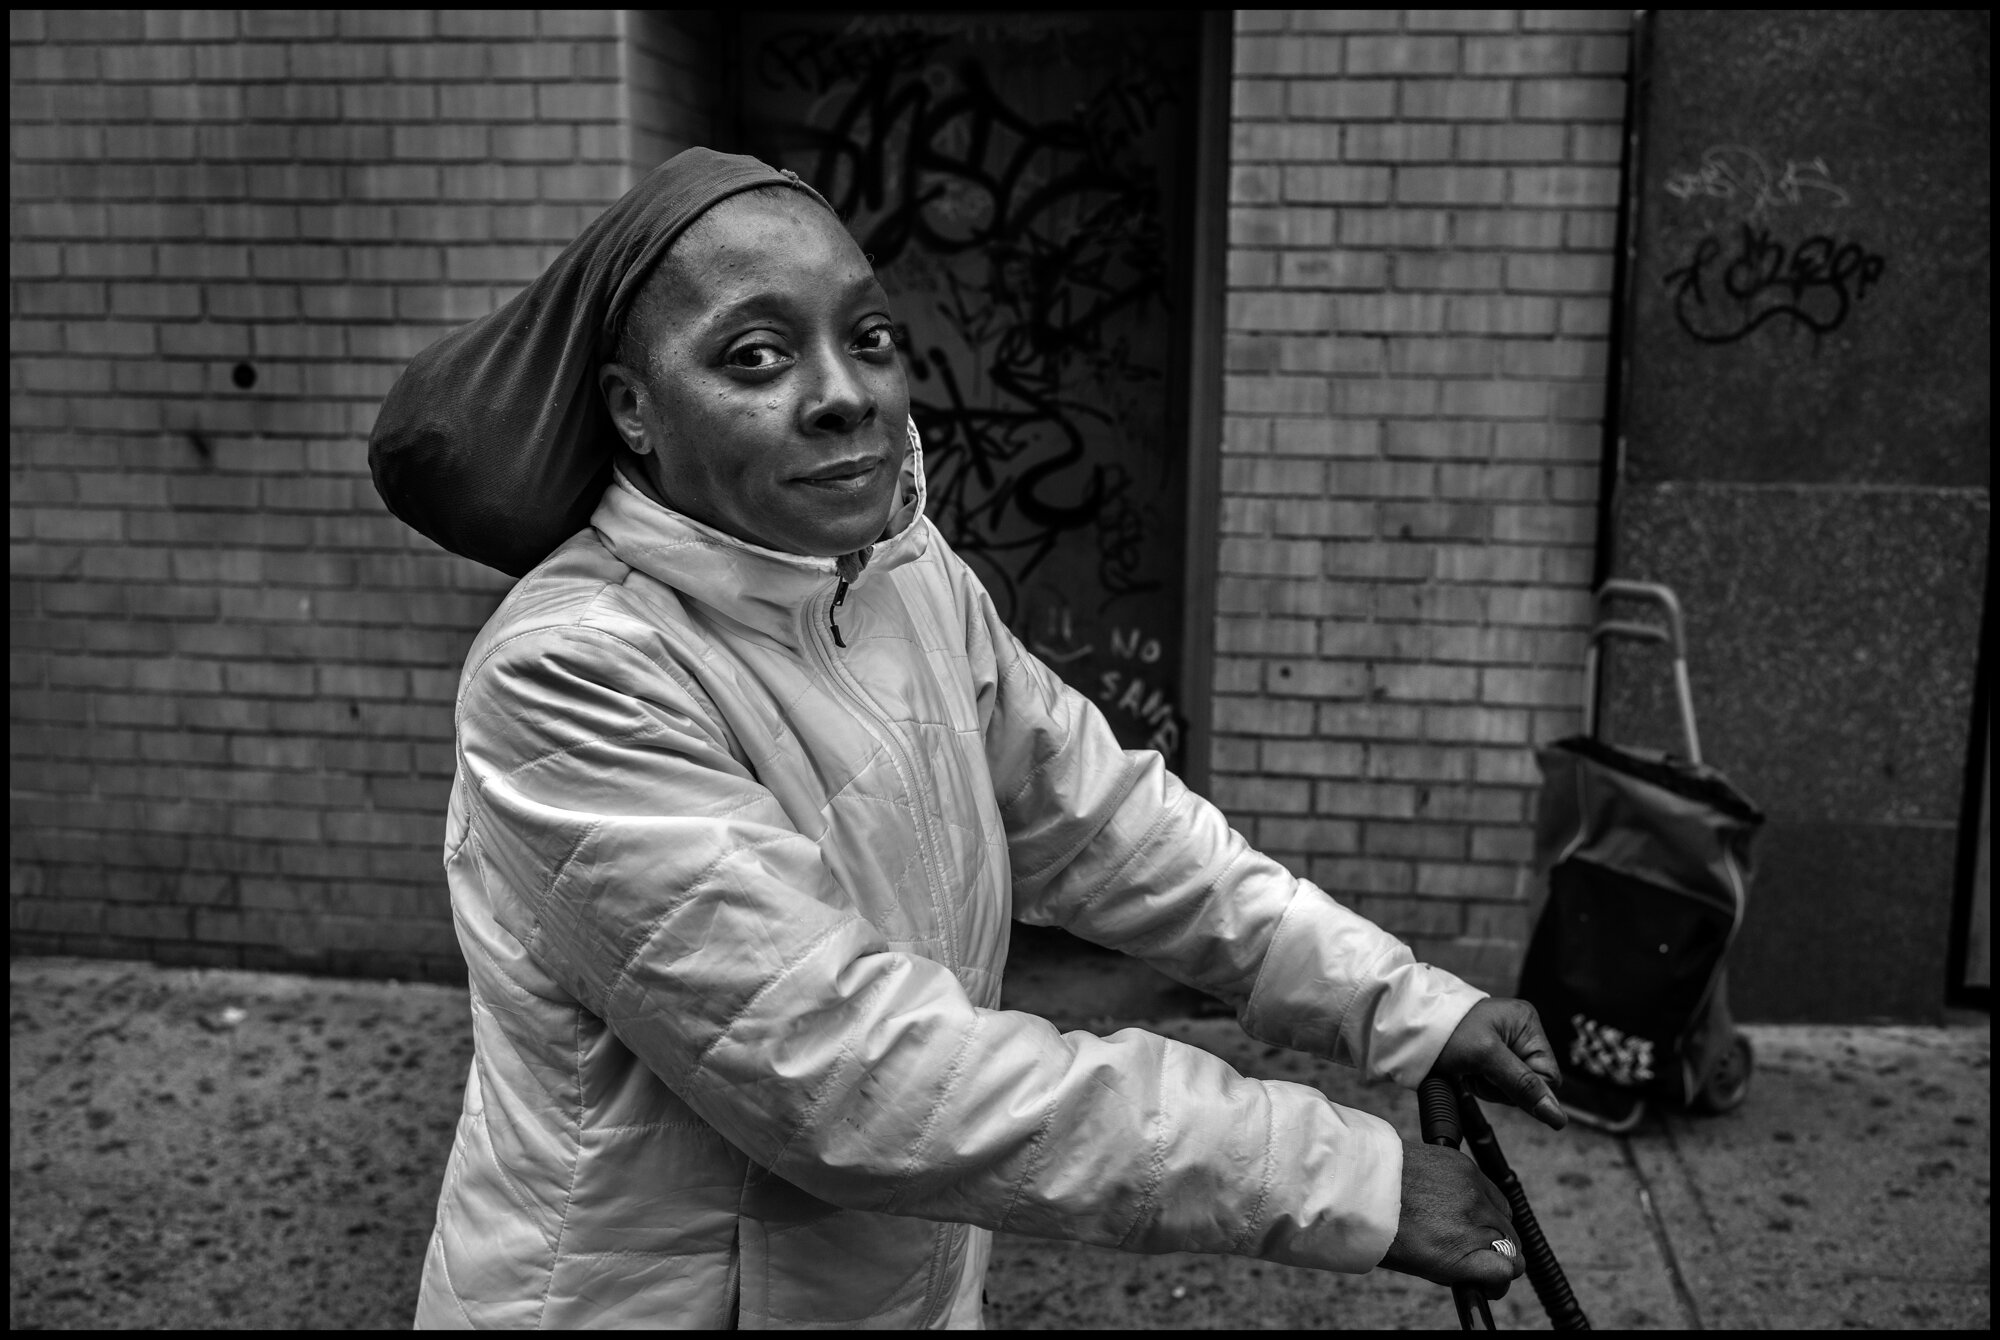  Mary, 51, told me she is a stay home mother with 4 children, and when I asked her how she was doing, she replied,“we’re doing the best we can”.   March 28, 2020. © Peter Turnley.  ID# 06-005 